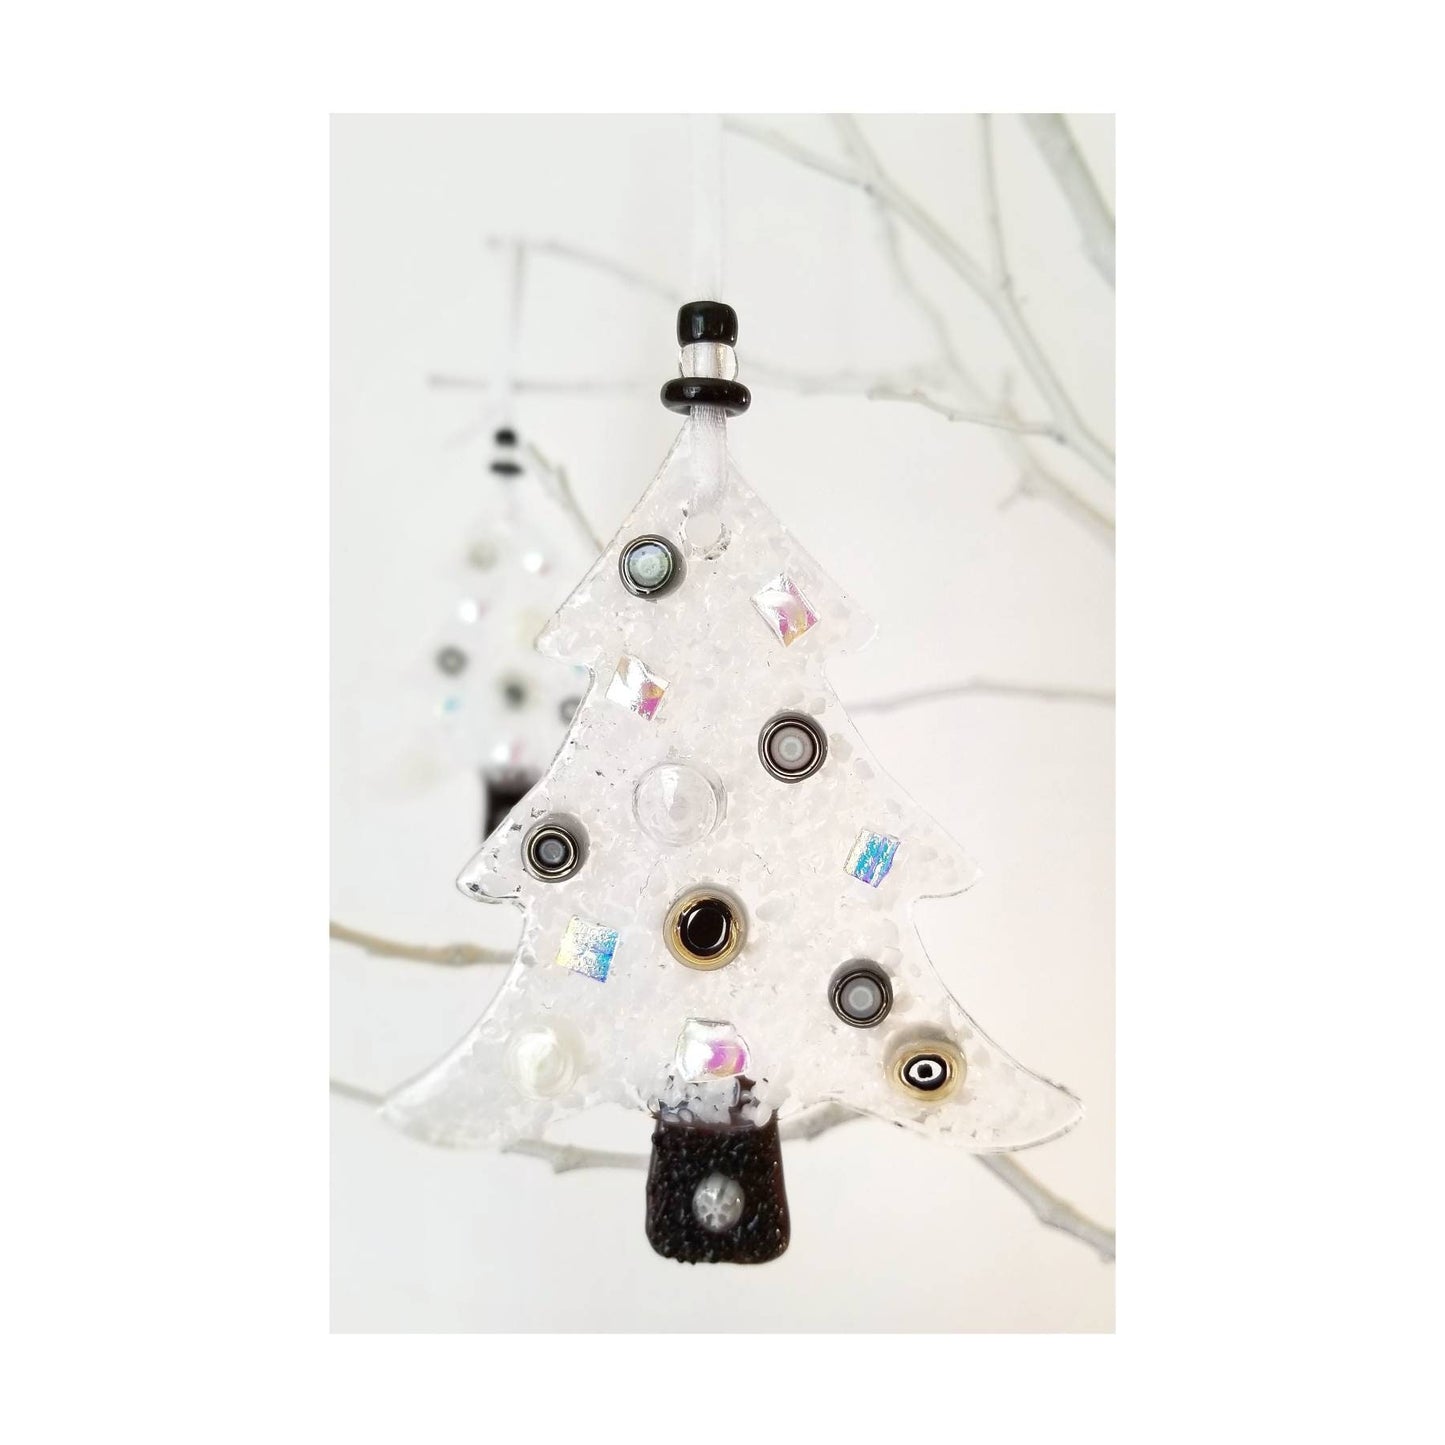 White Glass Ornament. Black or White Tree decorating is fun & creative. Kiln fused, crushed glass frit with Murrine. Clear gift box.